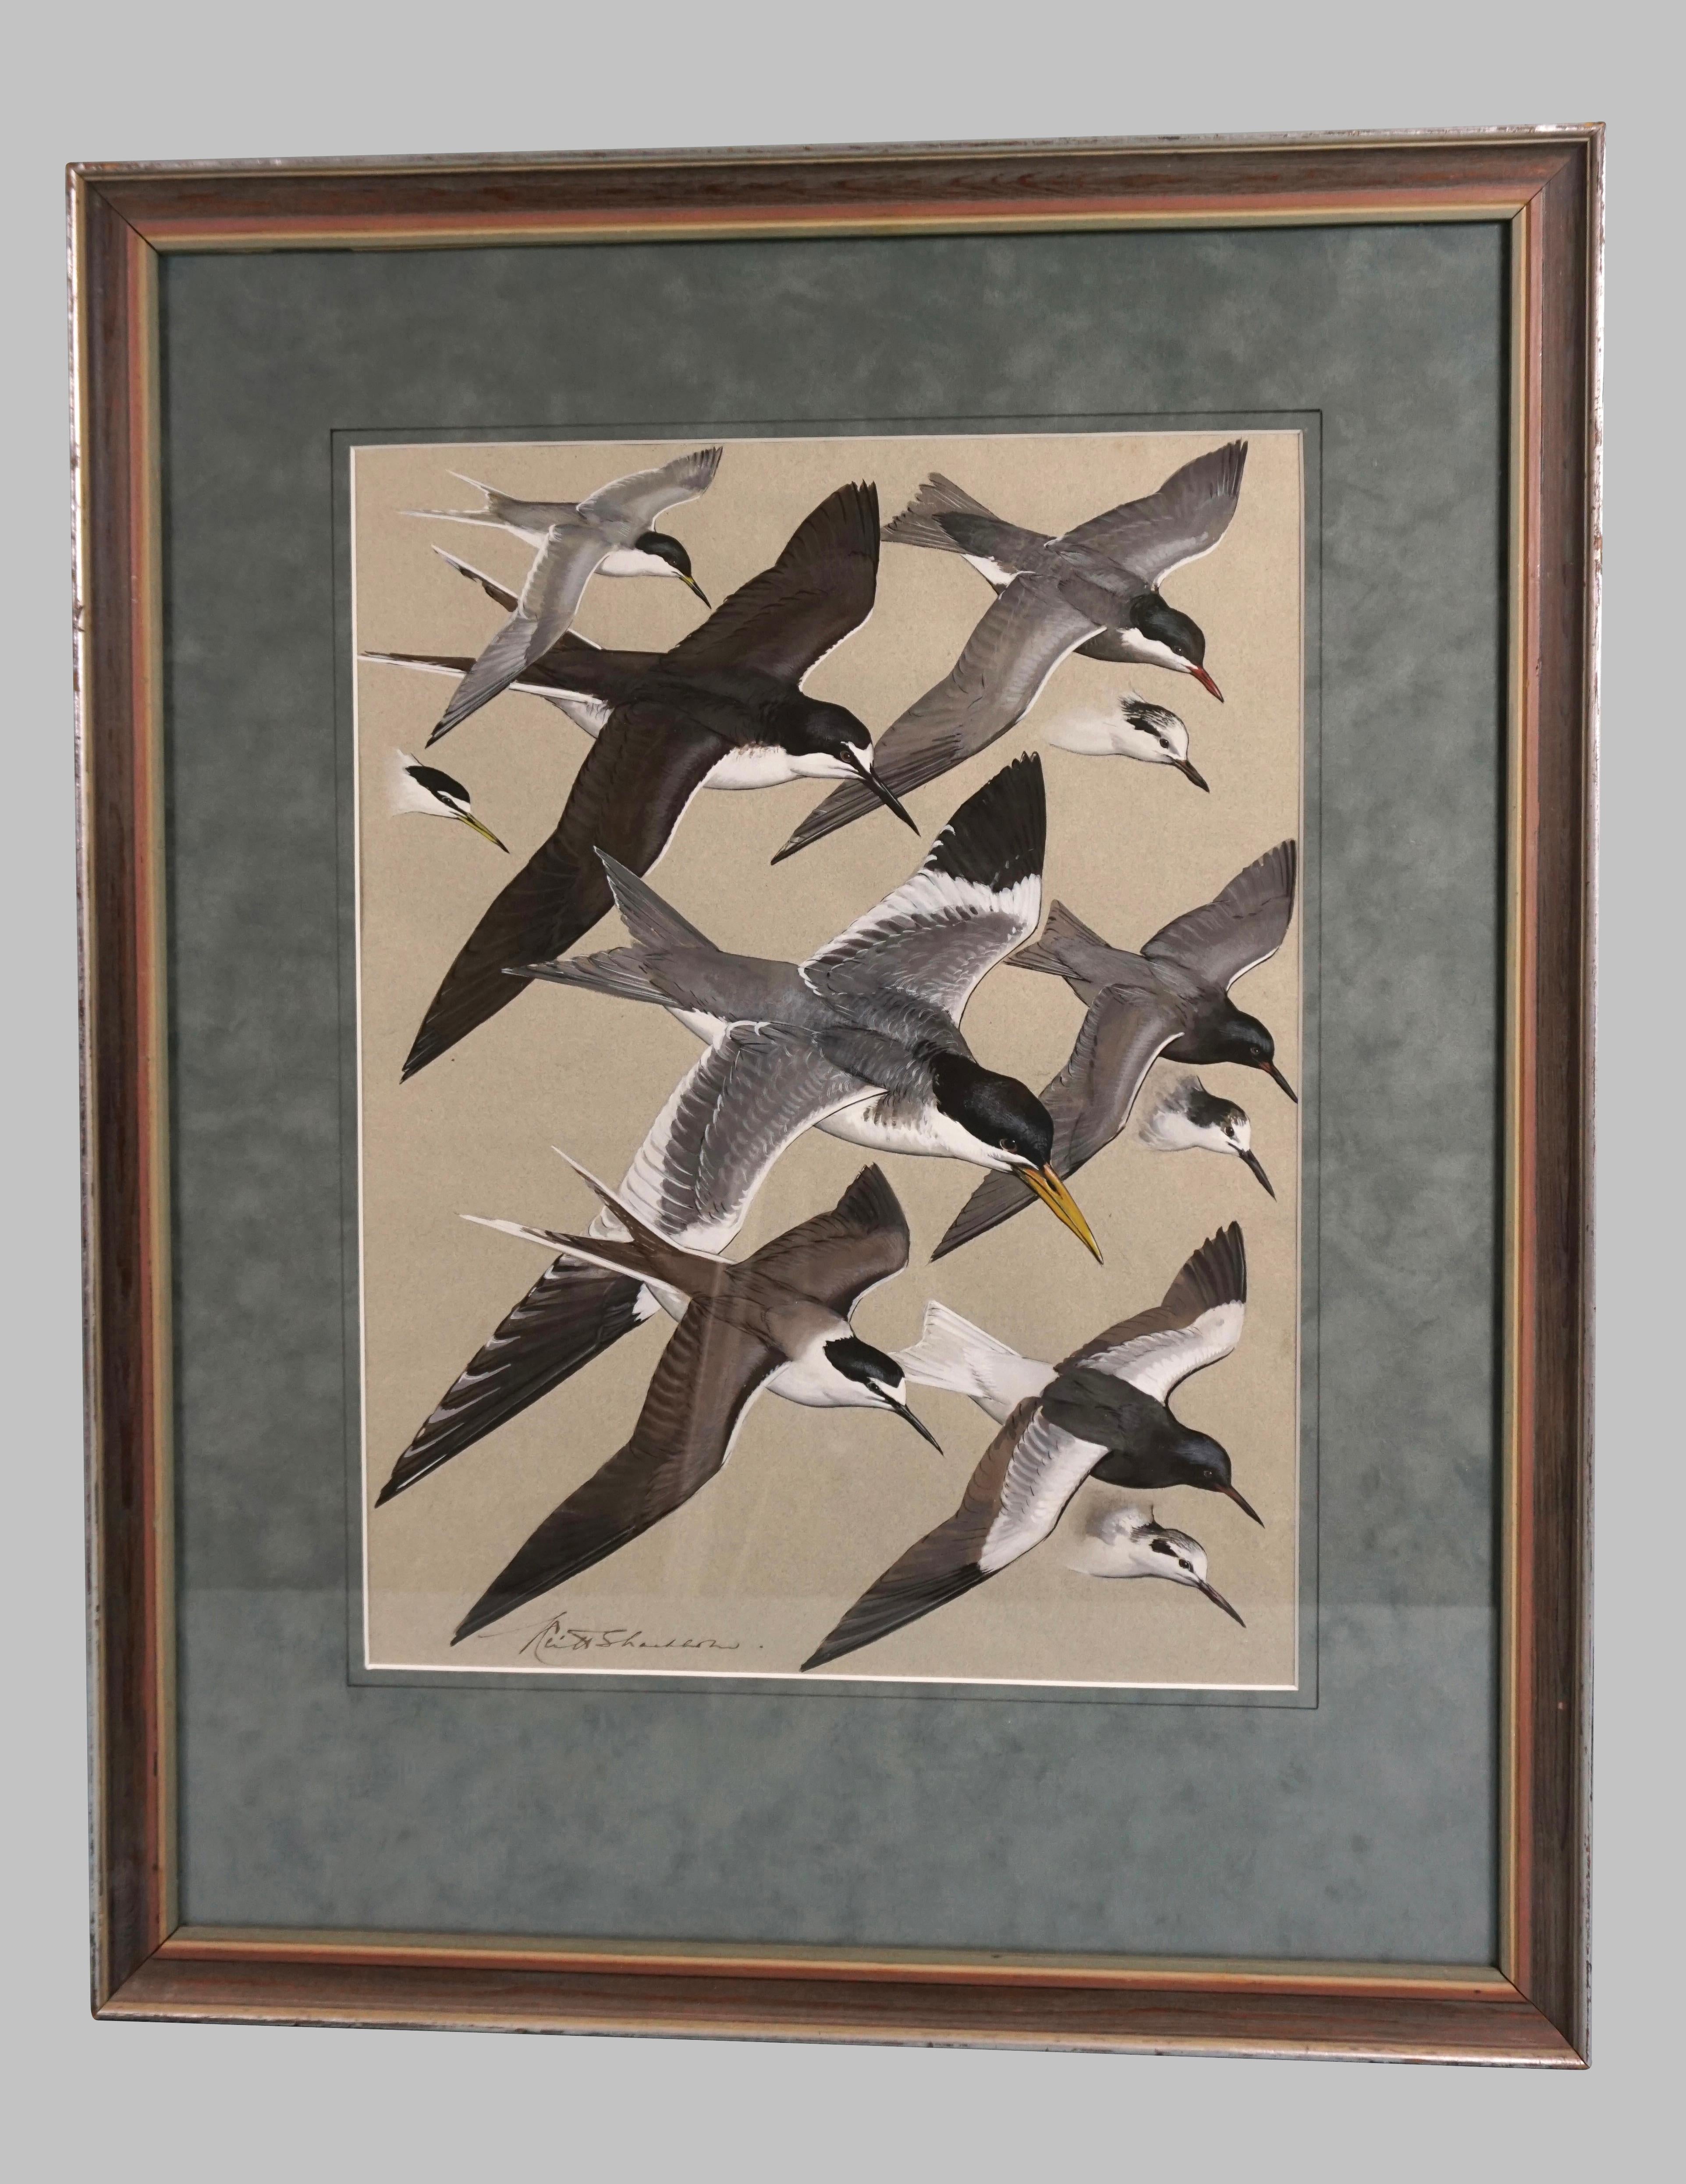 A dramatic gouache on paper of Arctic terns by Keith Shackleton, a well-known British naturalist and artist. Shackleton was appointed Member of the Order of the British Empire in 2012 for his efforts as an artist for services to the conservation of